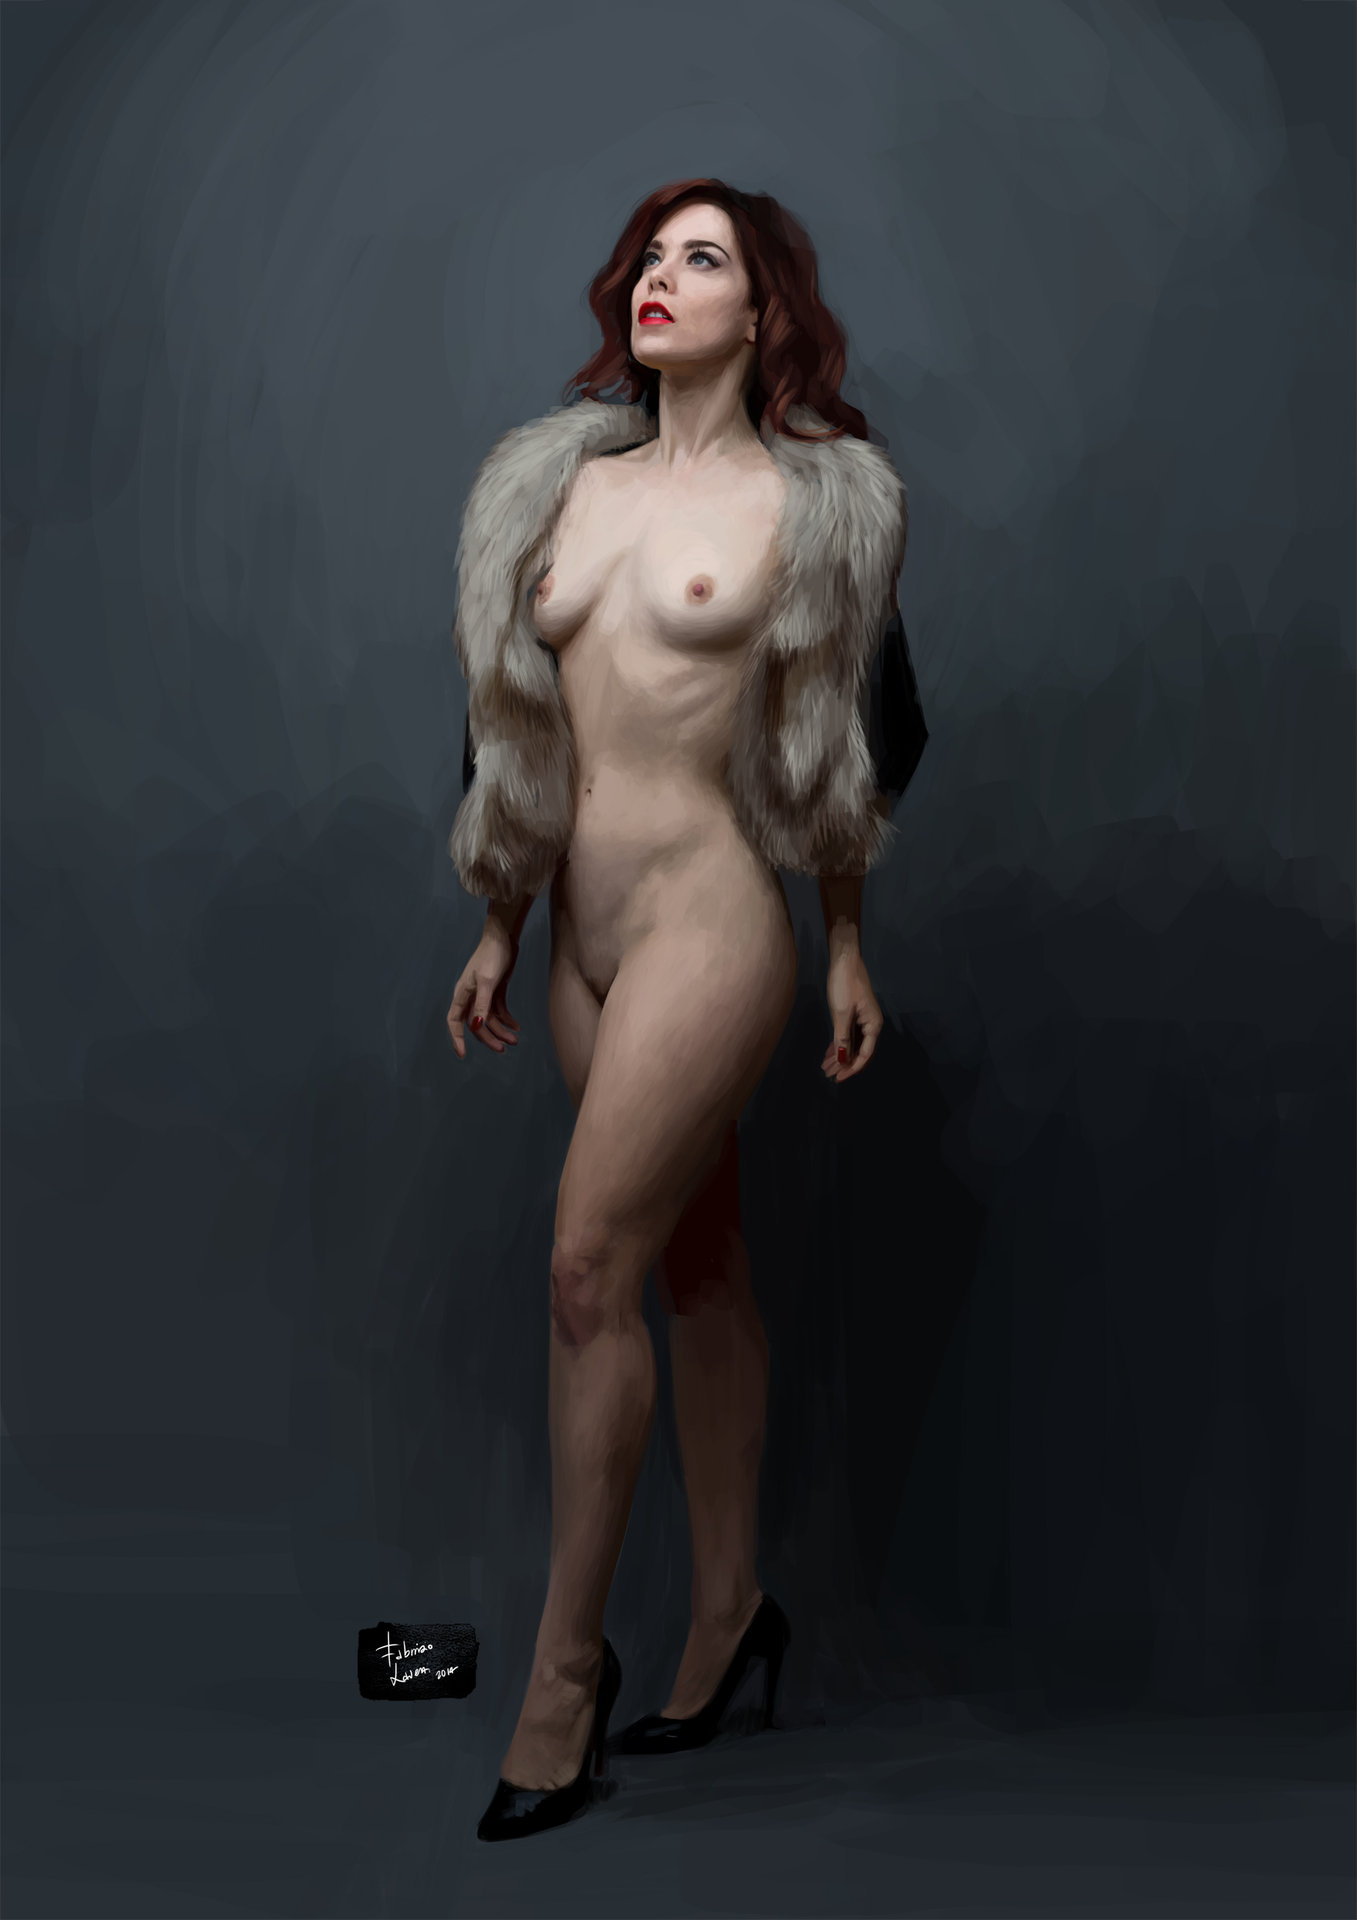 Nude study #3 (painting from photo on google images) .